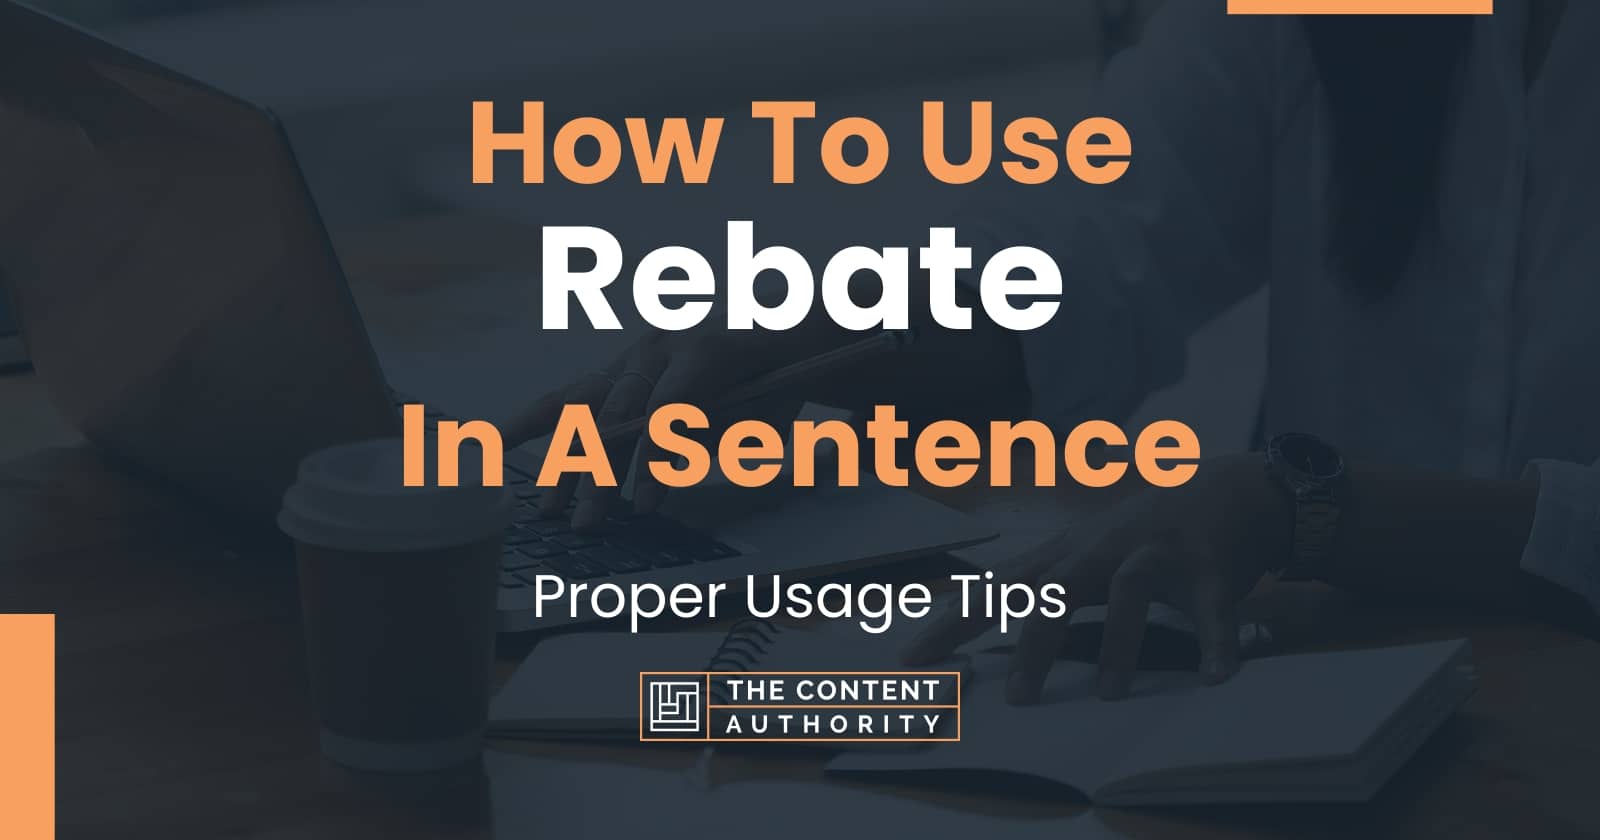 how-to-use-rebate-in-a-sentence-proper-usage-tips